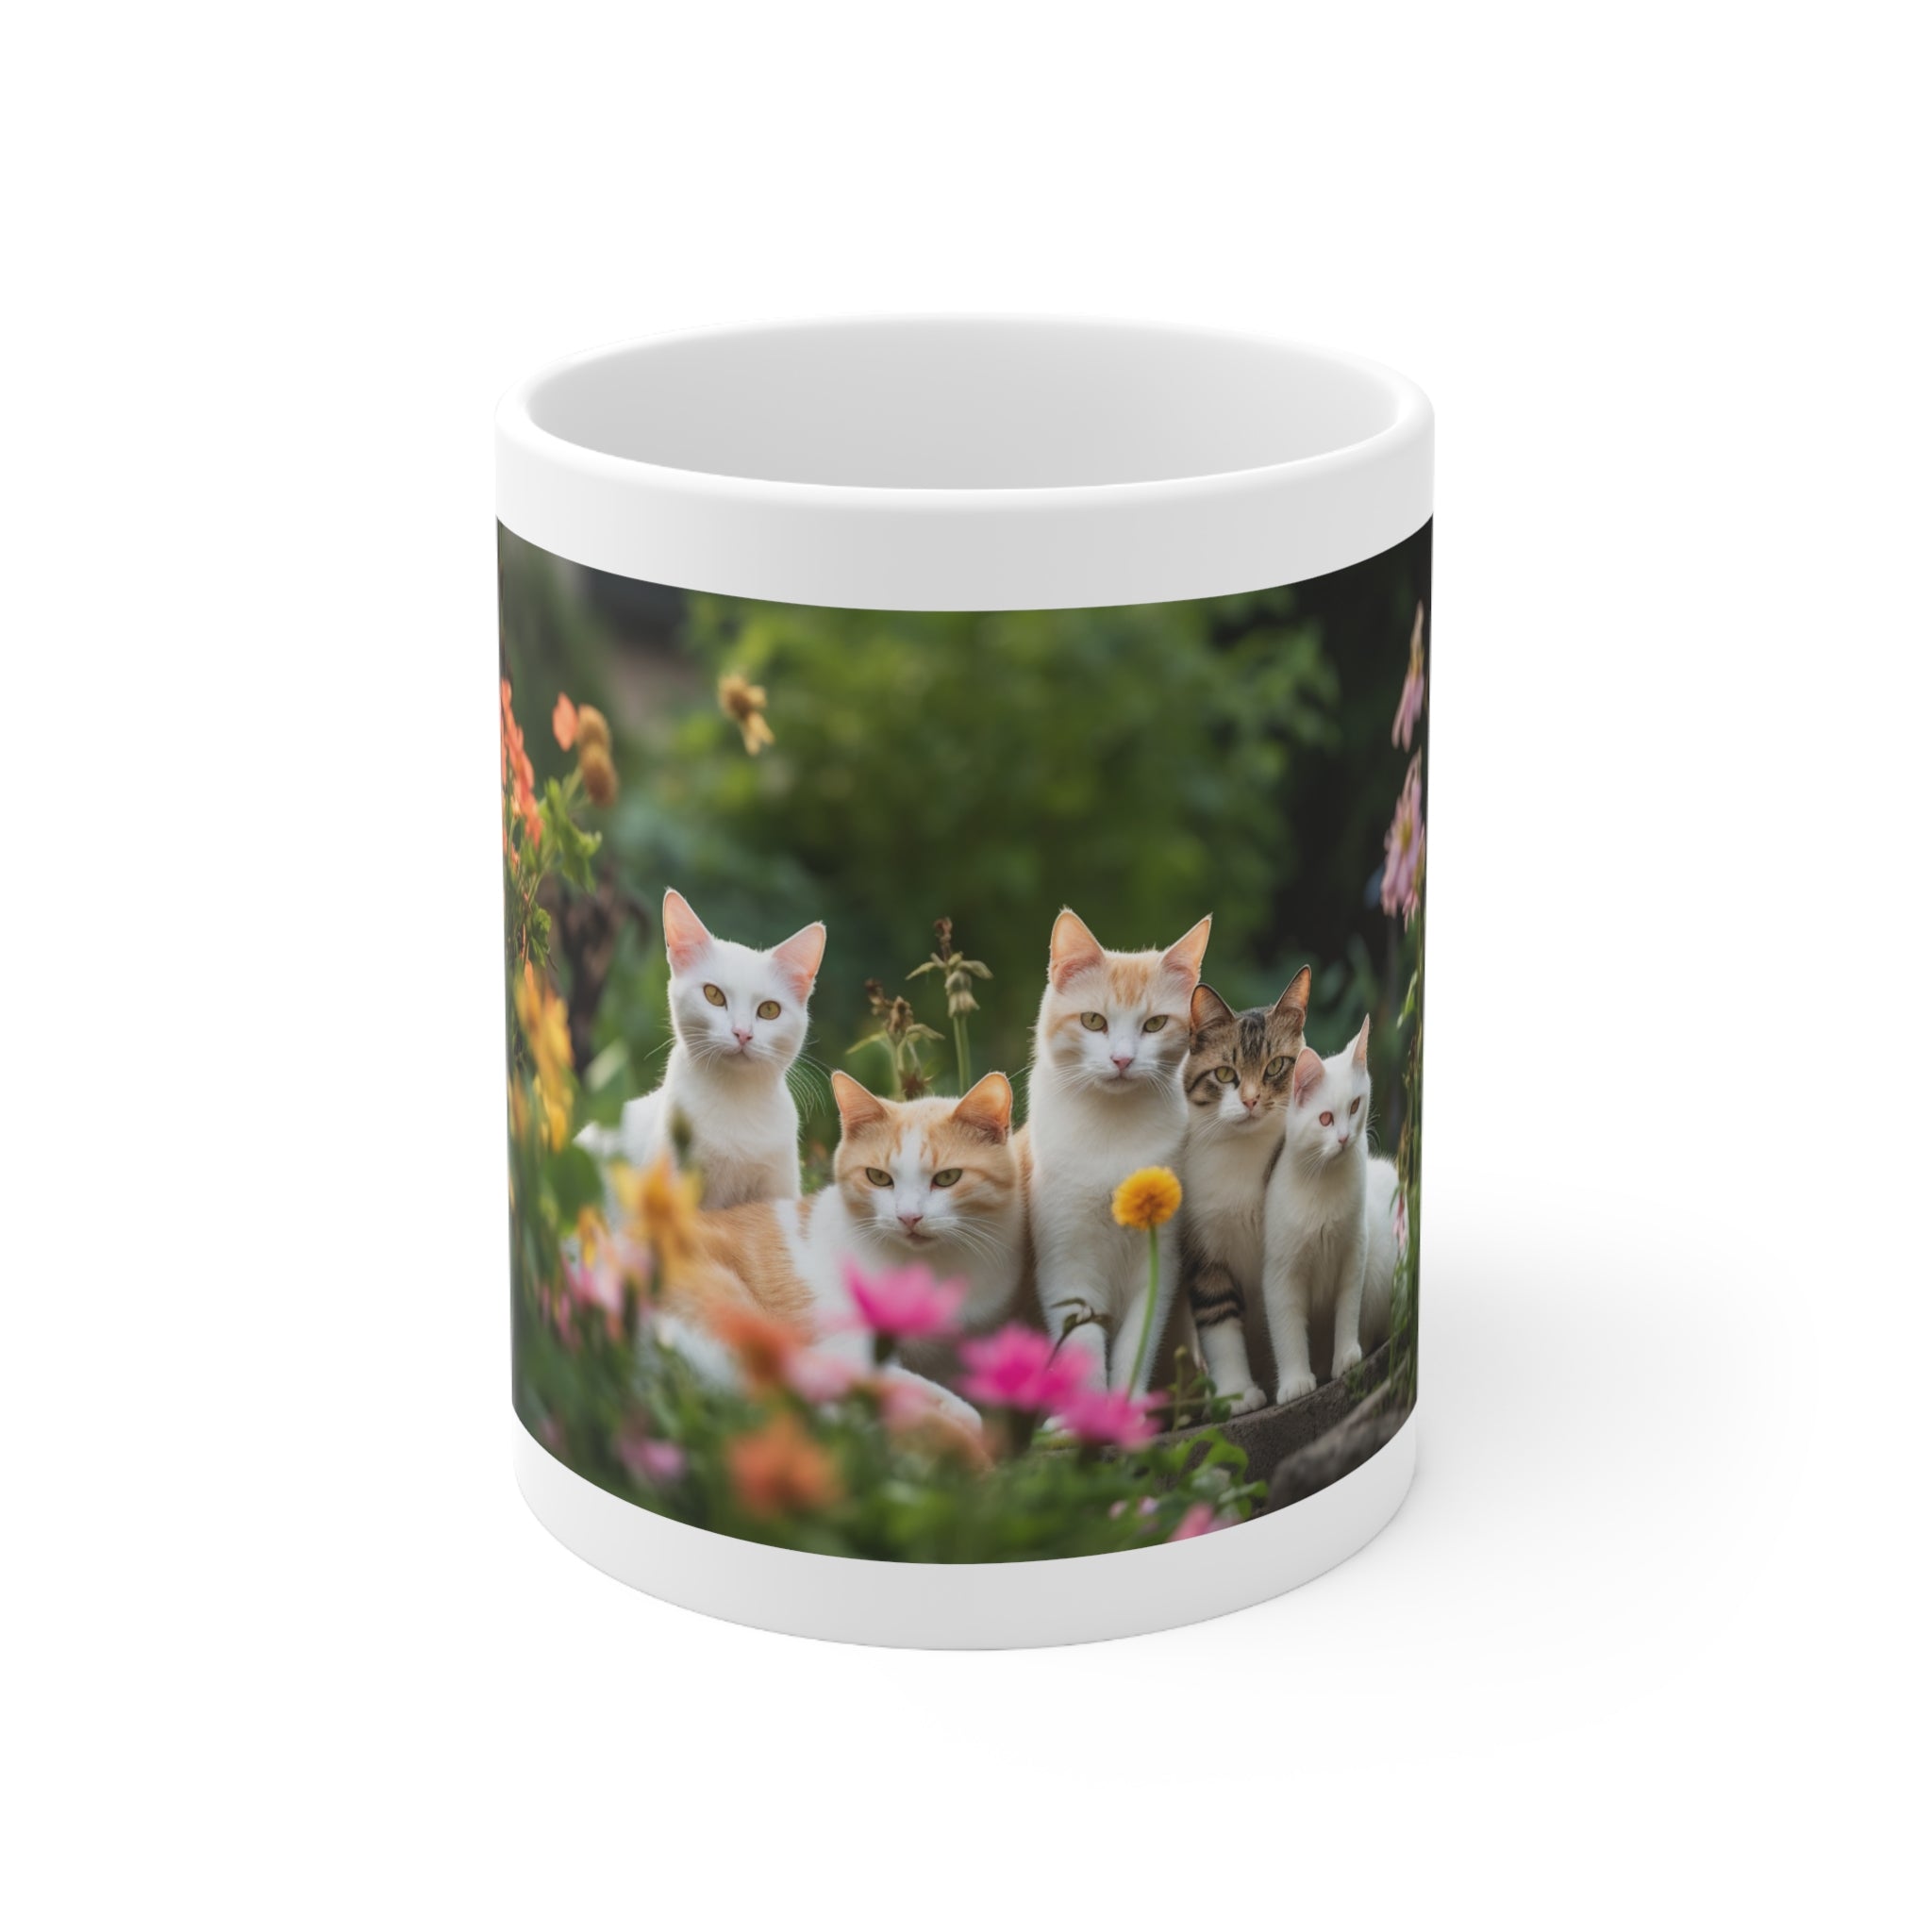 Photorealistic Cats Ceramic Mug - Whiskers in Wonderland - Colorful Garden Design - Colorful Garden Coffee Cup